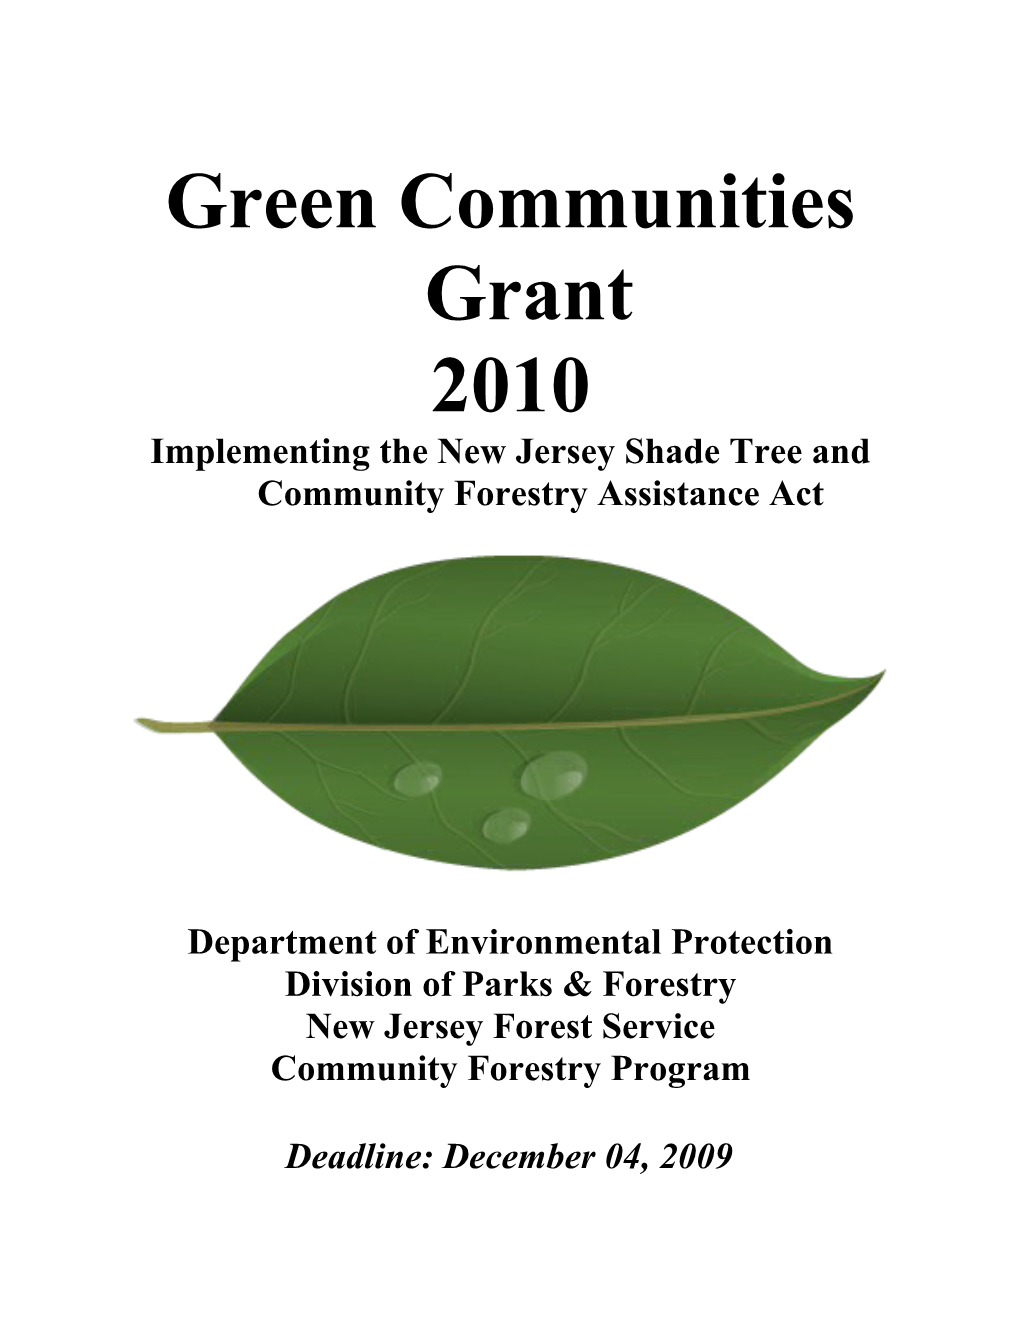 Implementing the New Jersey Shade Tree and Community Forestry Assistance Act